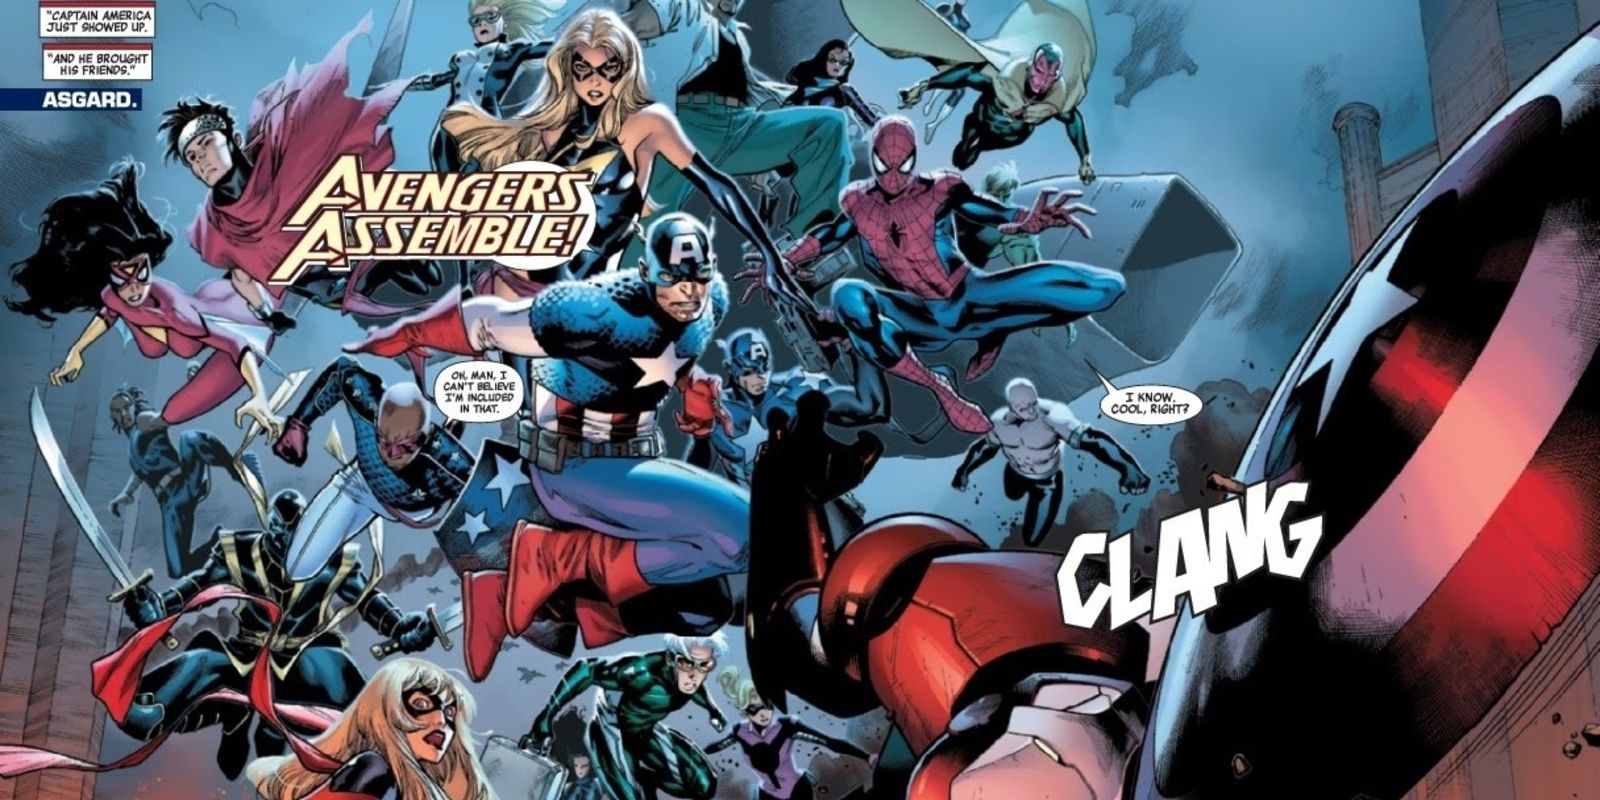 Captain America leads united teams of Avengers against Osborn's forces in the Siege event